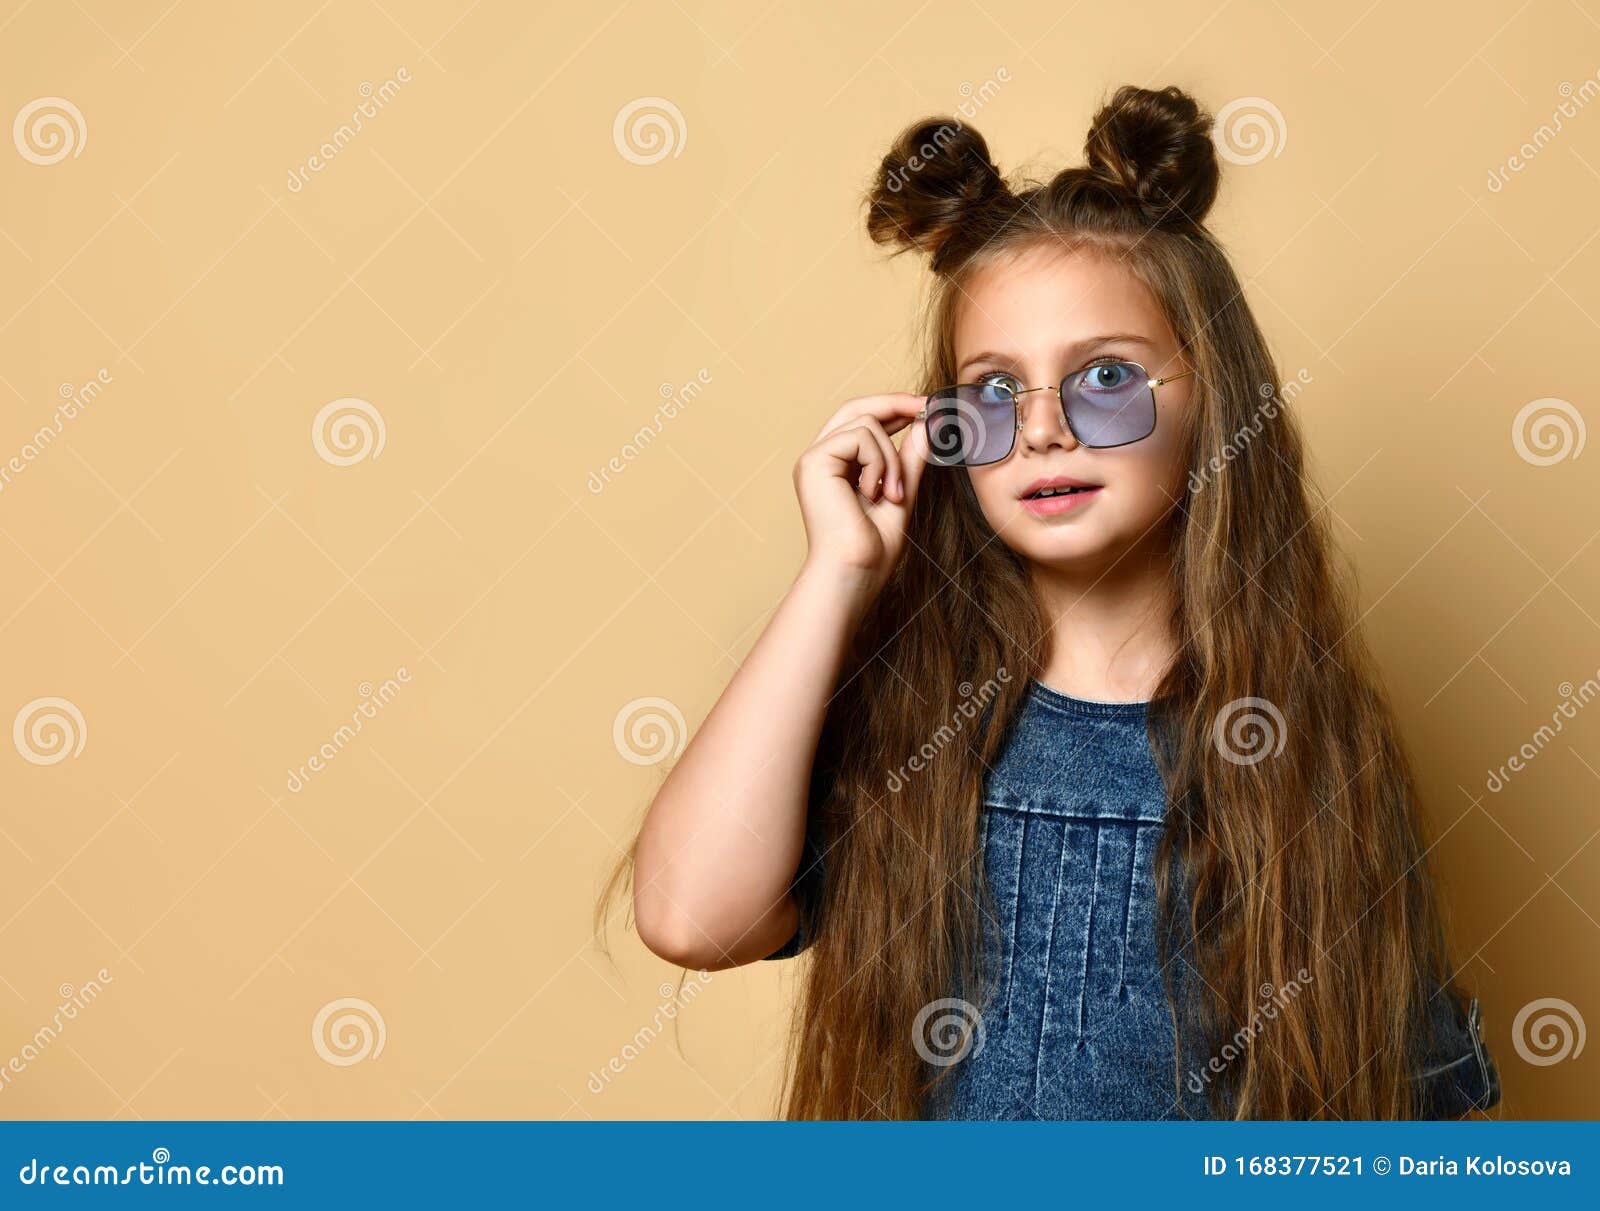 Cute Girl in Jeans Sundress and Sunglasses Posing on Camera. Stock Image -  Image of emotion, jeans: 168377521